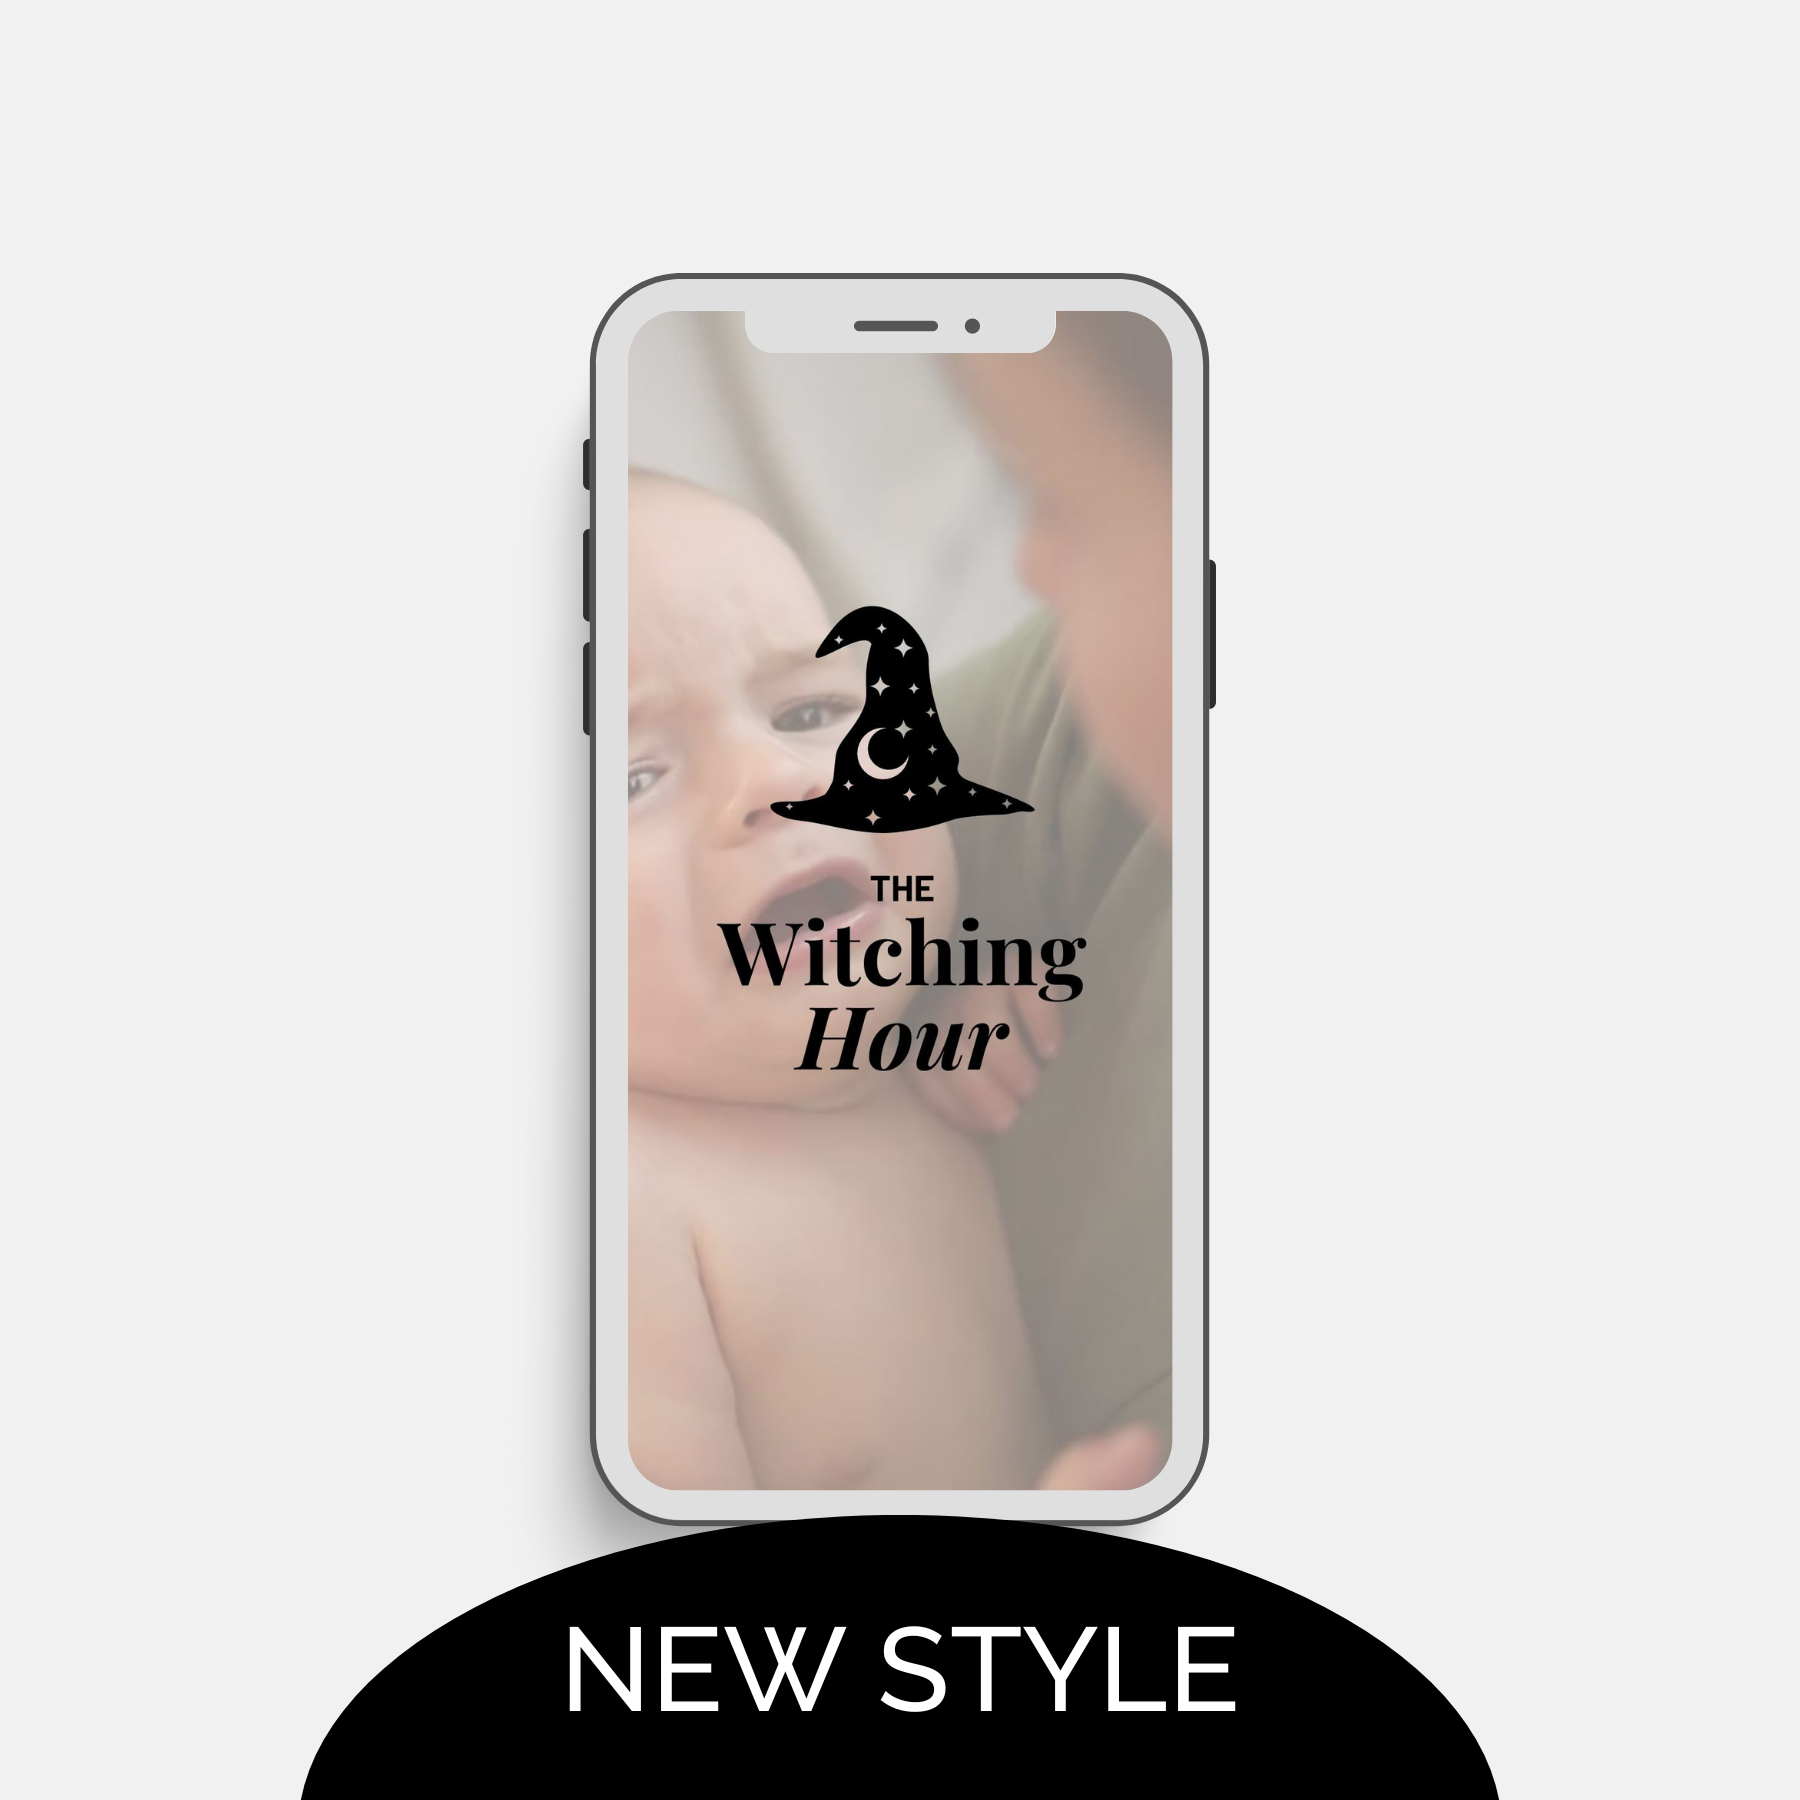 Video Post Template - The Witching Hour